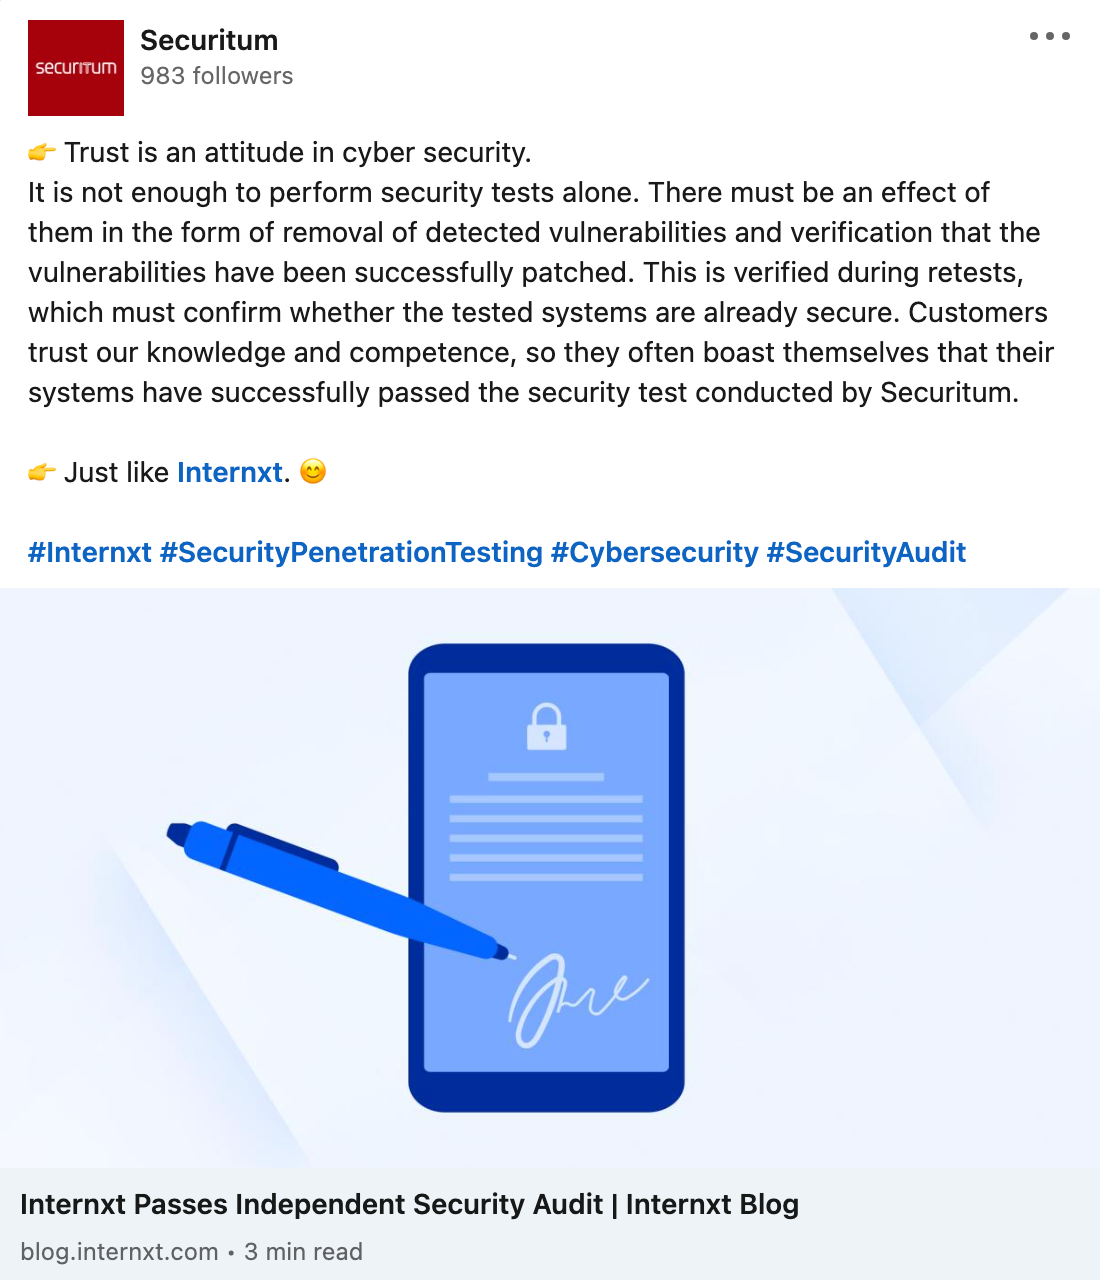 Tweet from Securitum for Internxt Security Audit